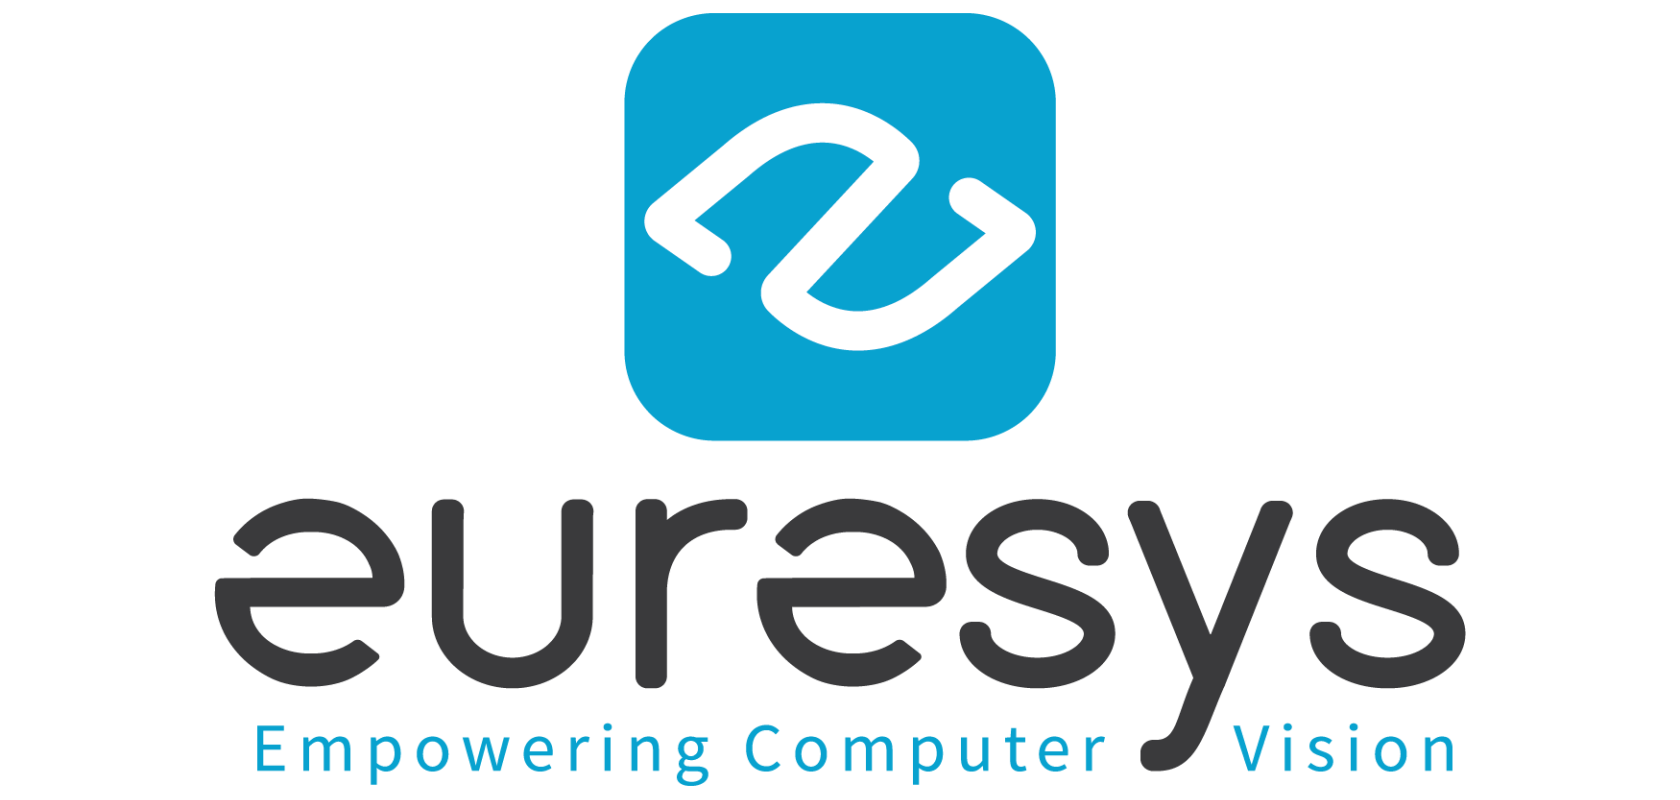 Euresys - Empowering Computer Vision